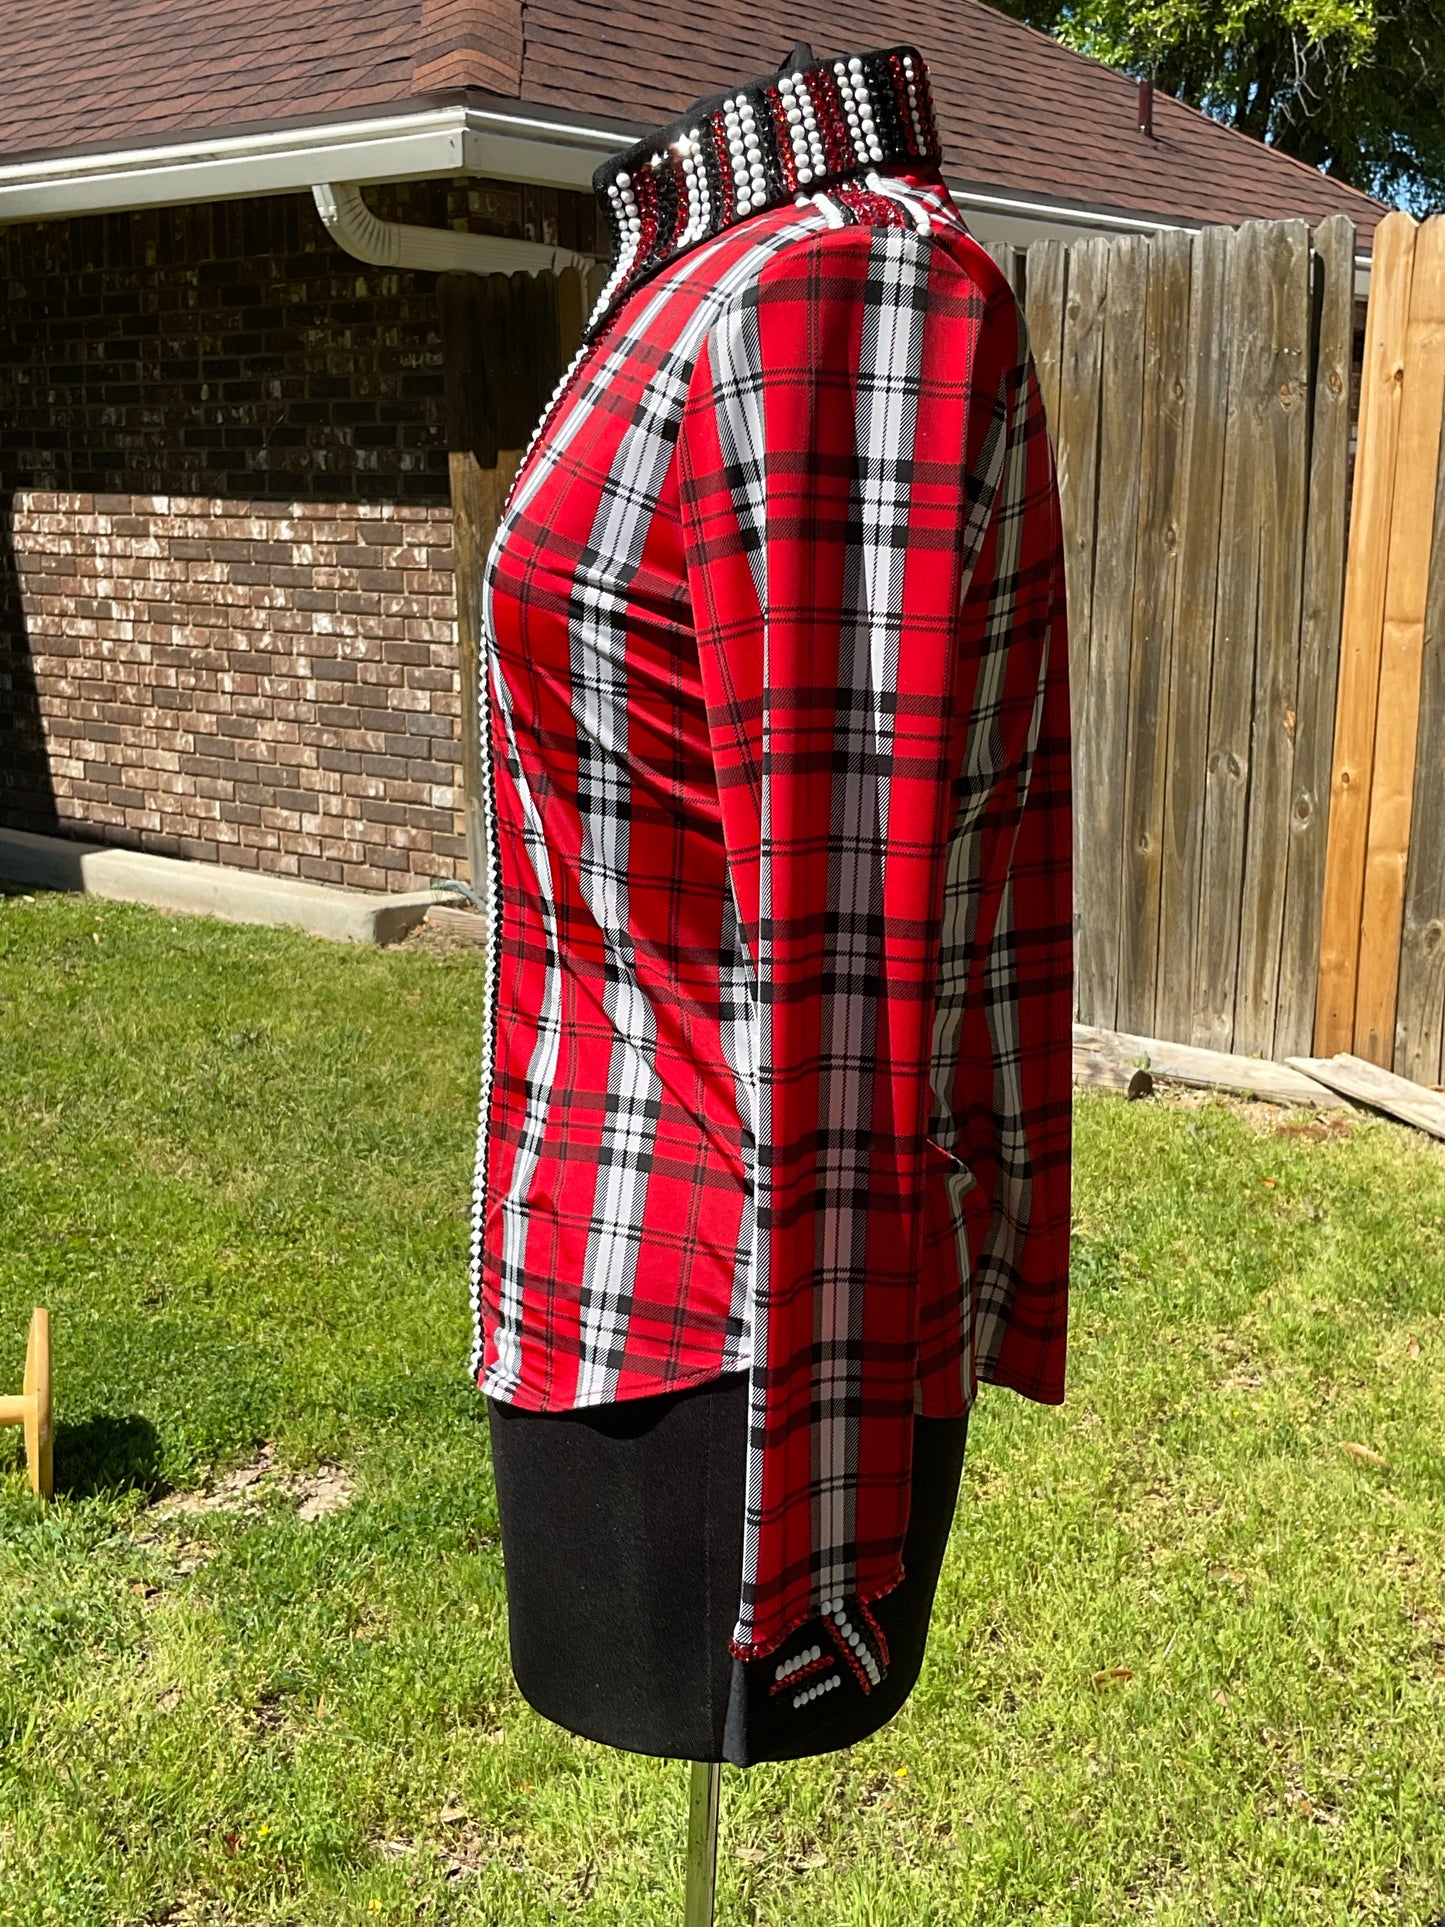 Size medium stretch Red and Black Plaid with whites